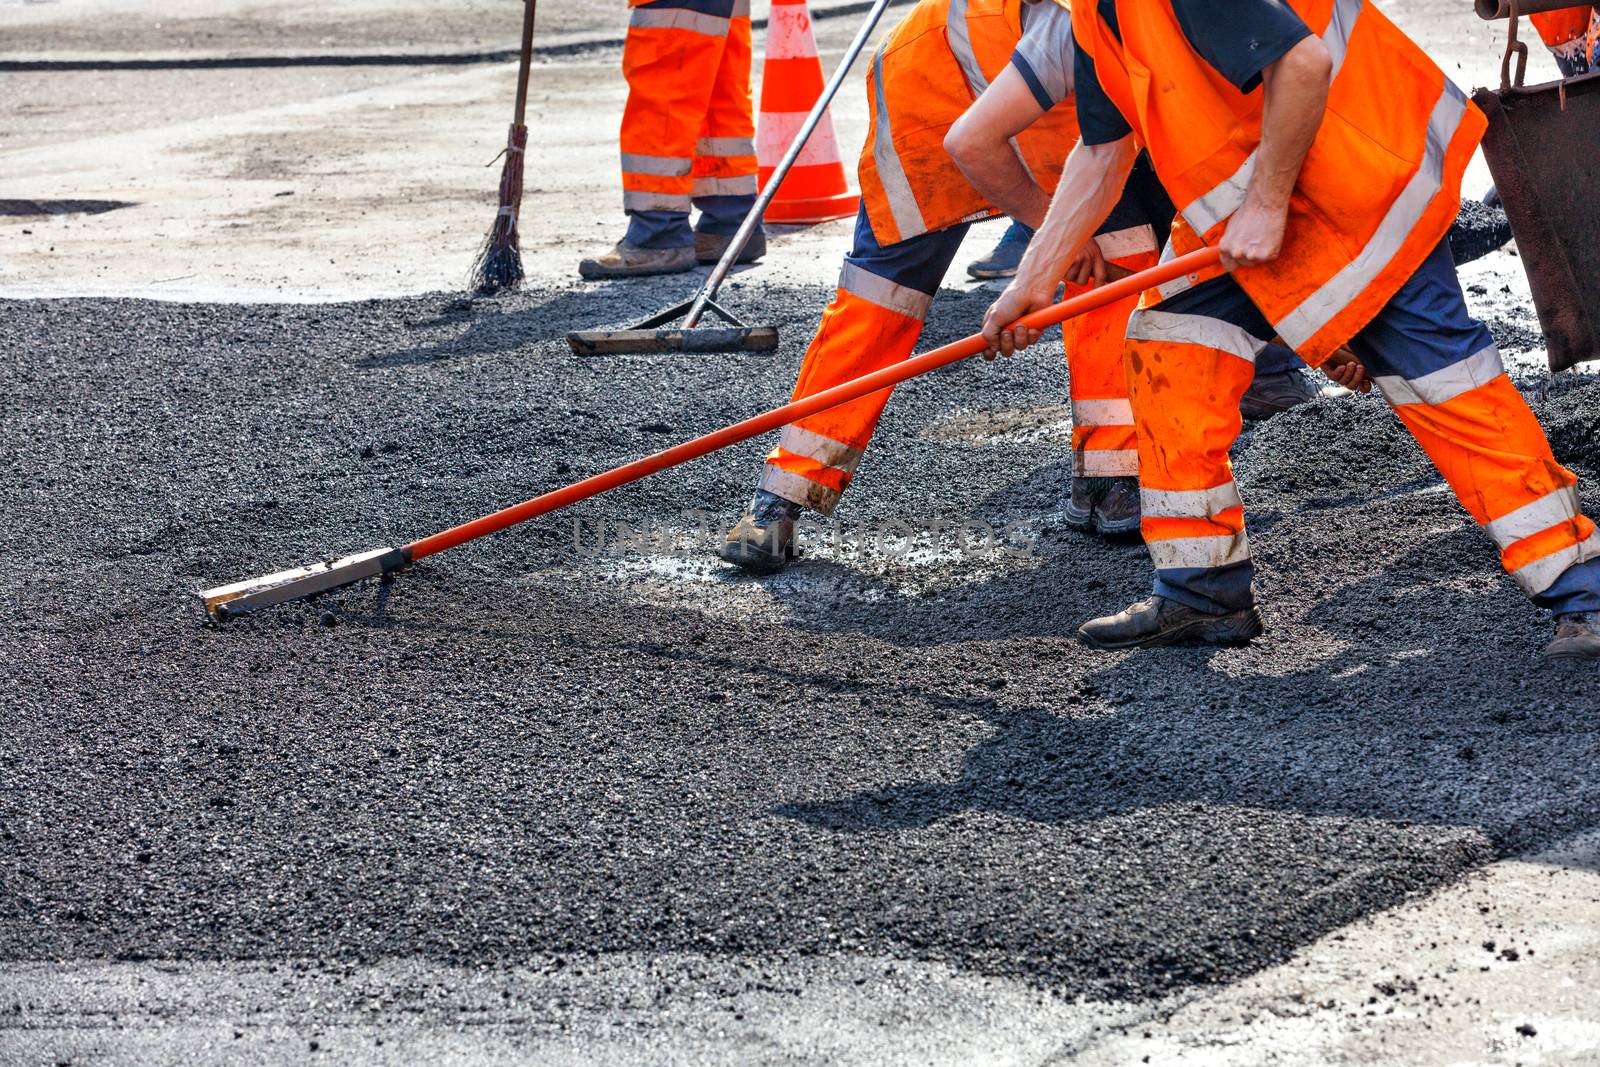 Partial road repairs, a working team smooths hot asphalt with metal levels by hand. by Sergii